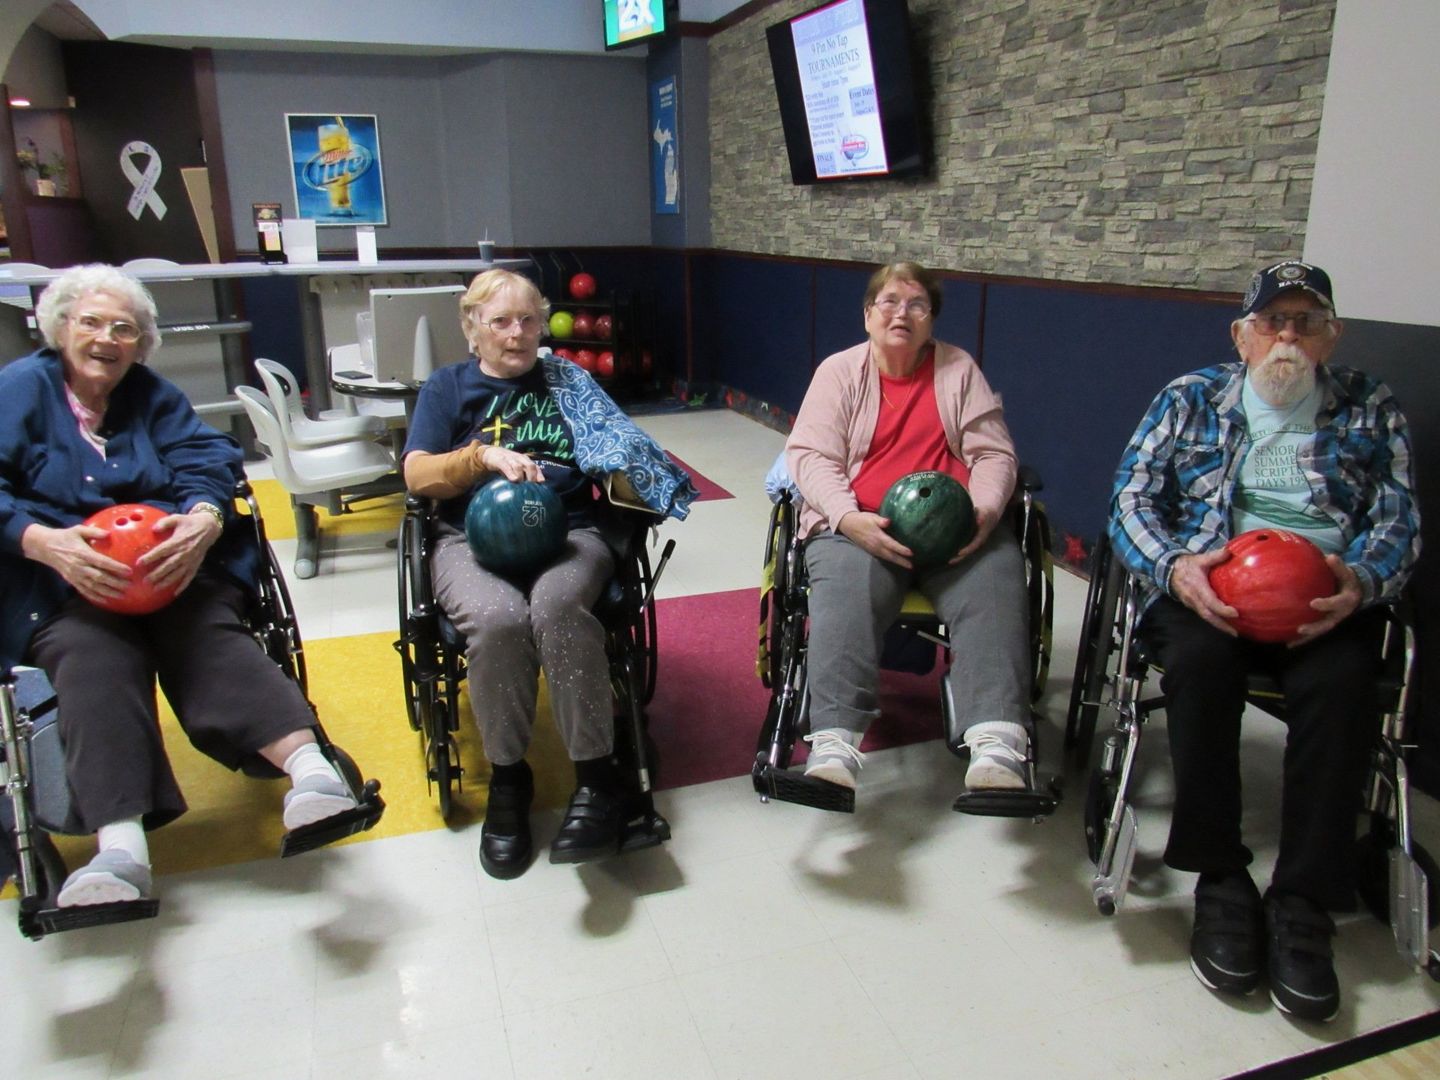 Elders bowling during an outing at Lenawee Medical Care Facility in Adrian, MI